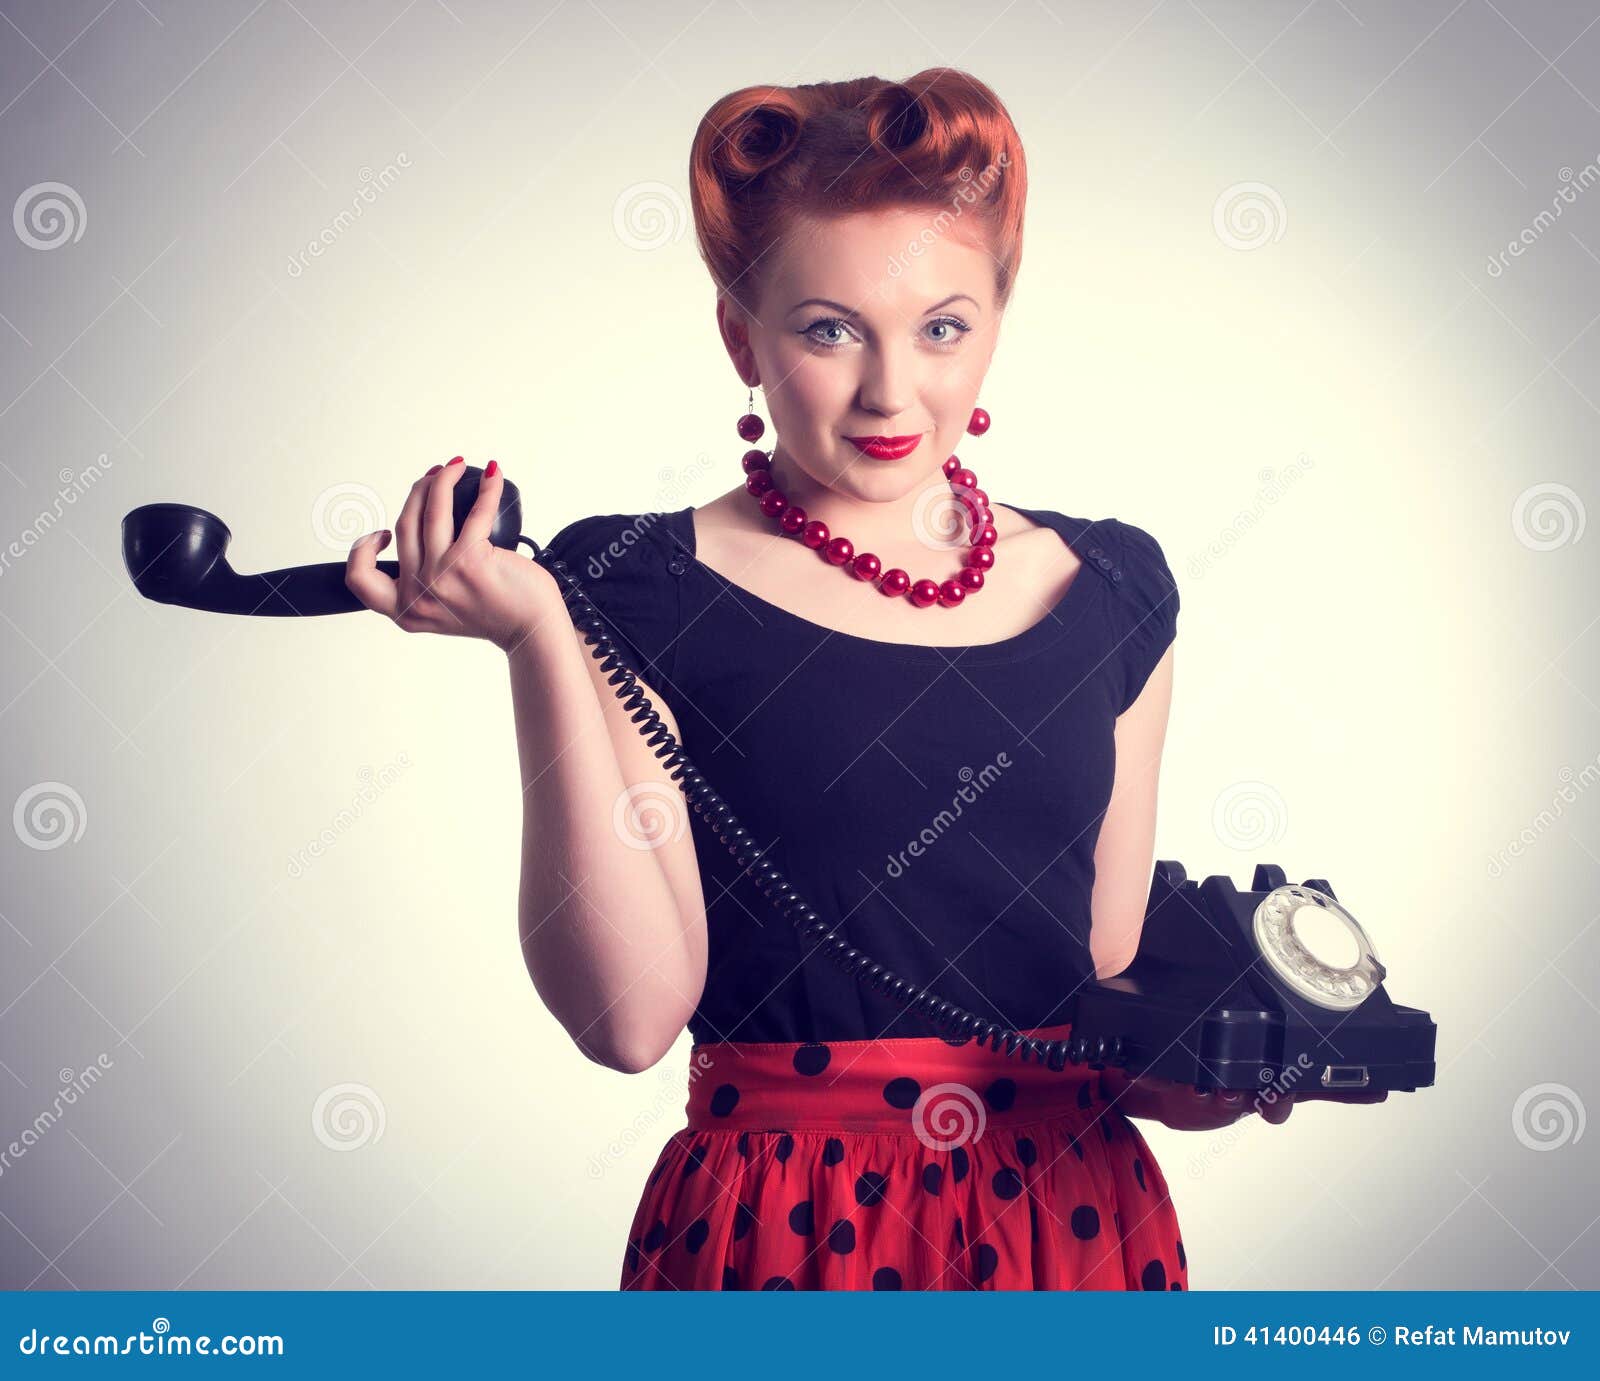 Woman Talking on Land Line Phone. Stock Photo - Image of aristocratic ...